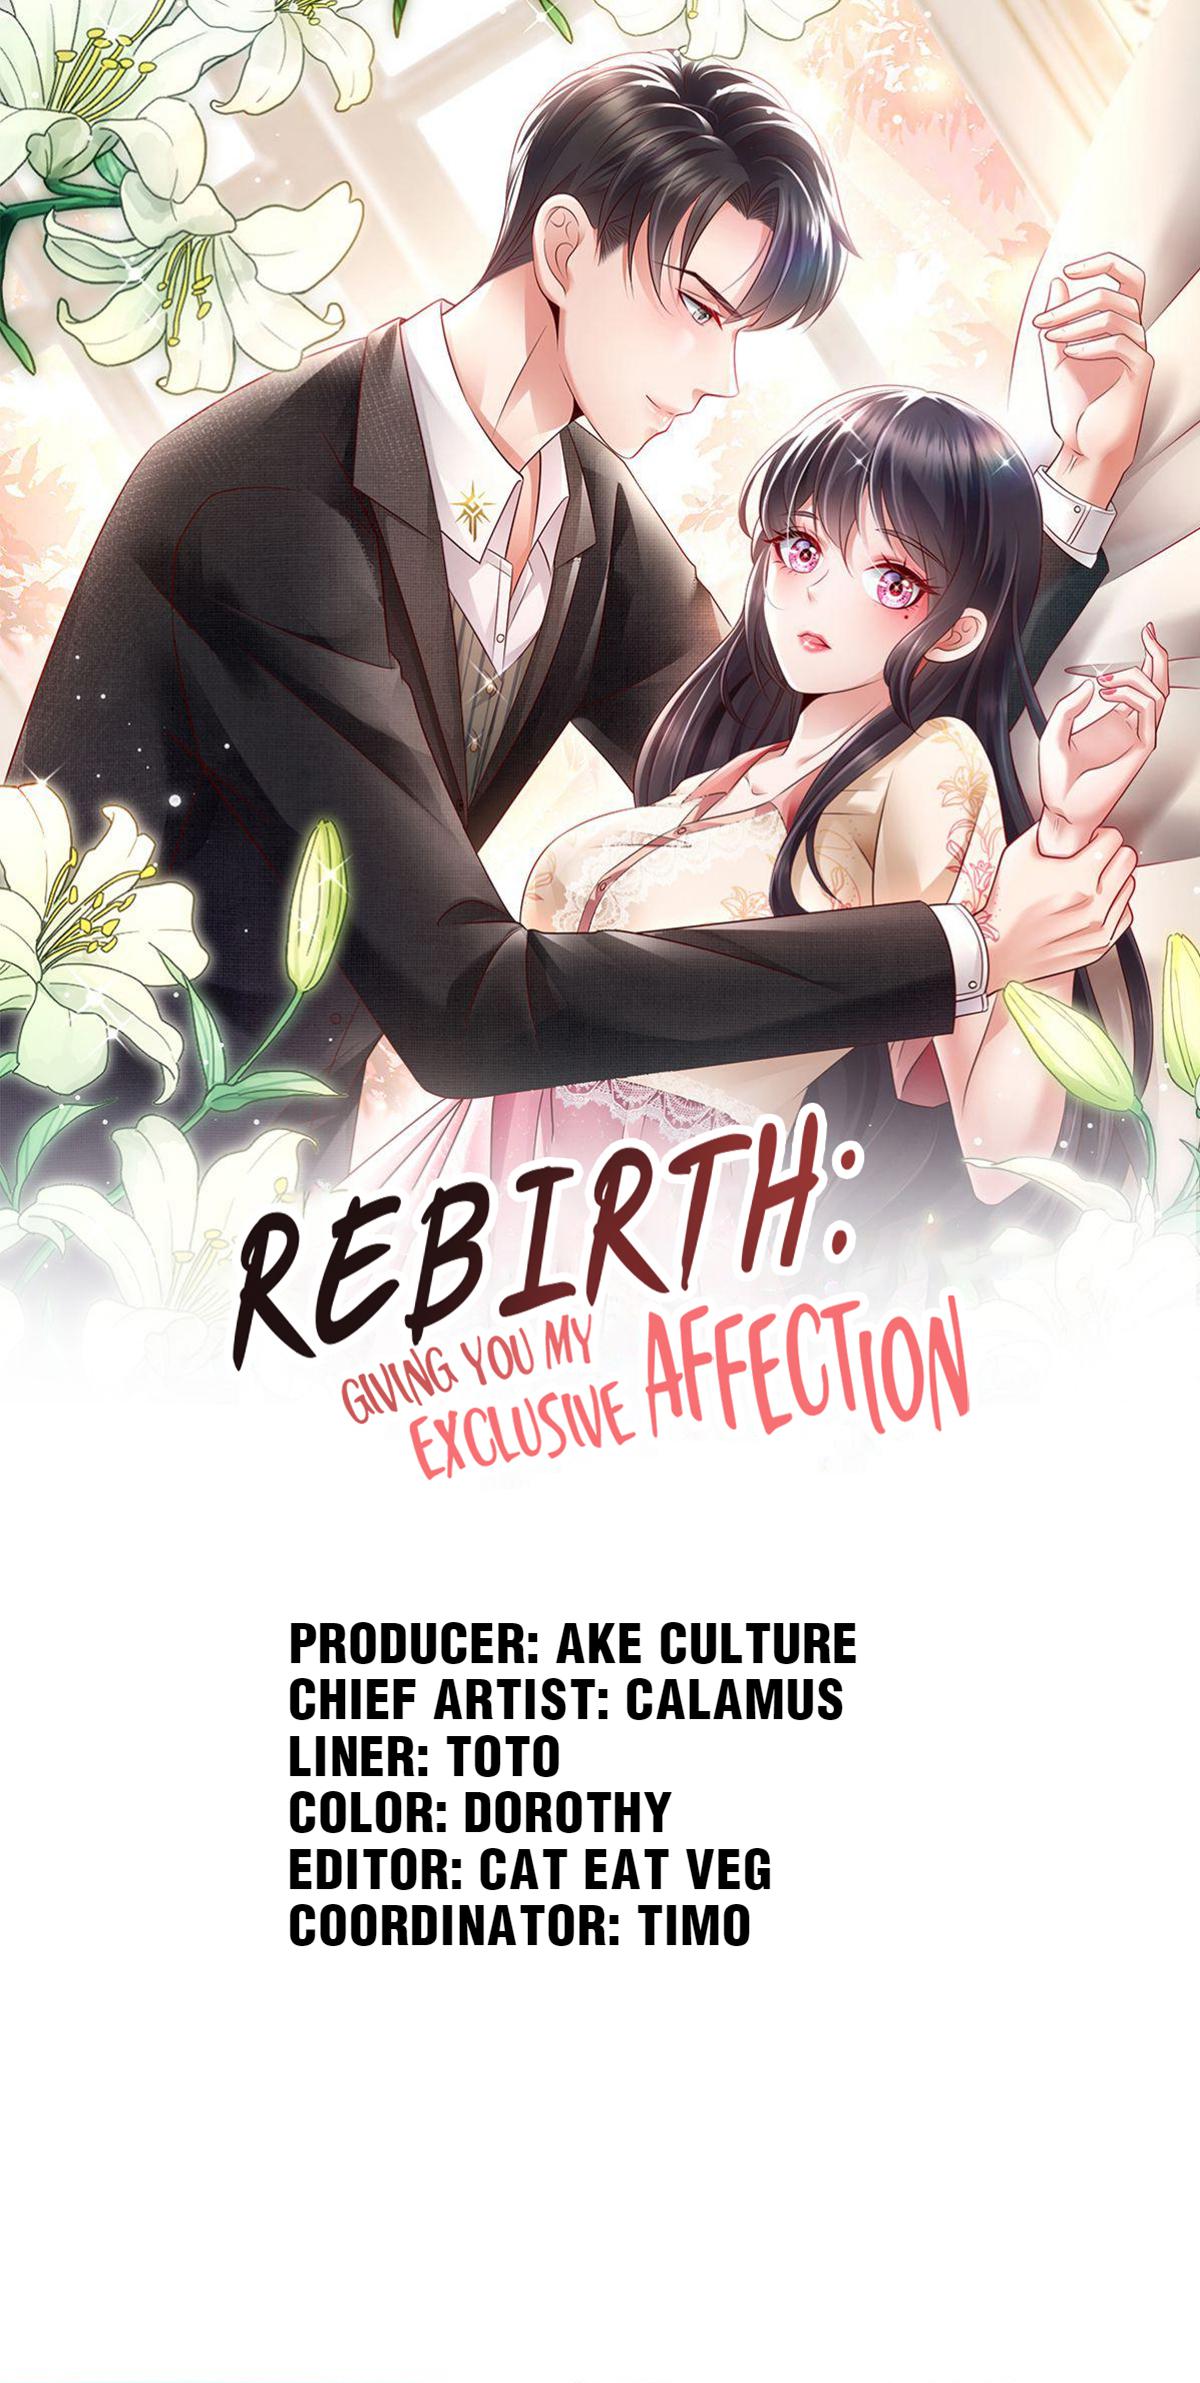 Rebirth: Giving You My Exclusive Affection 63